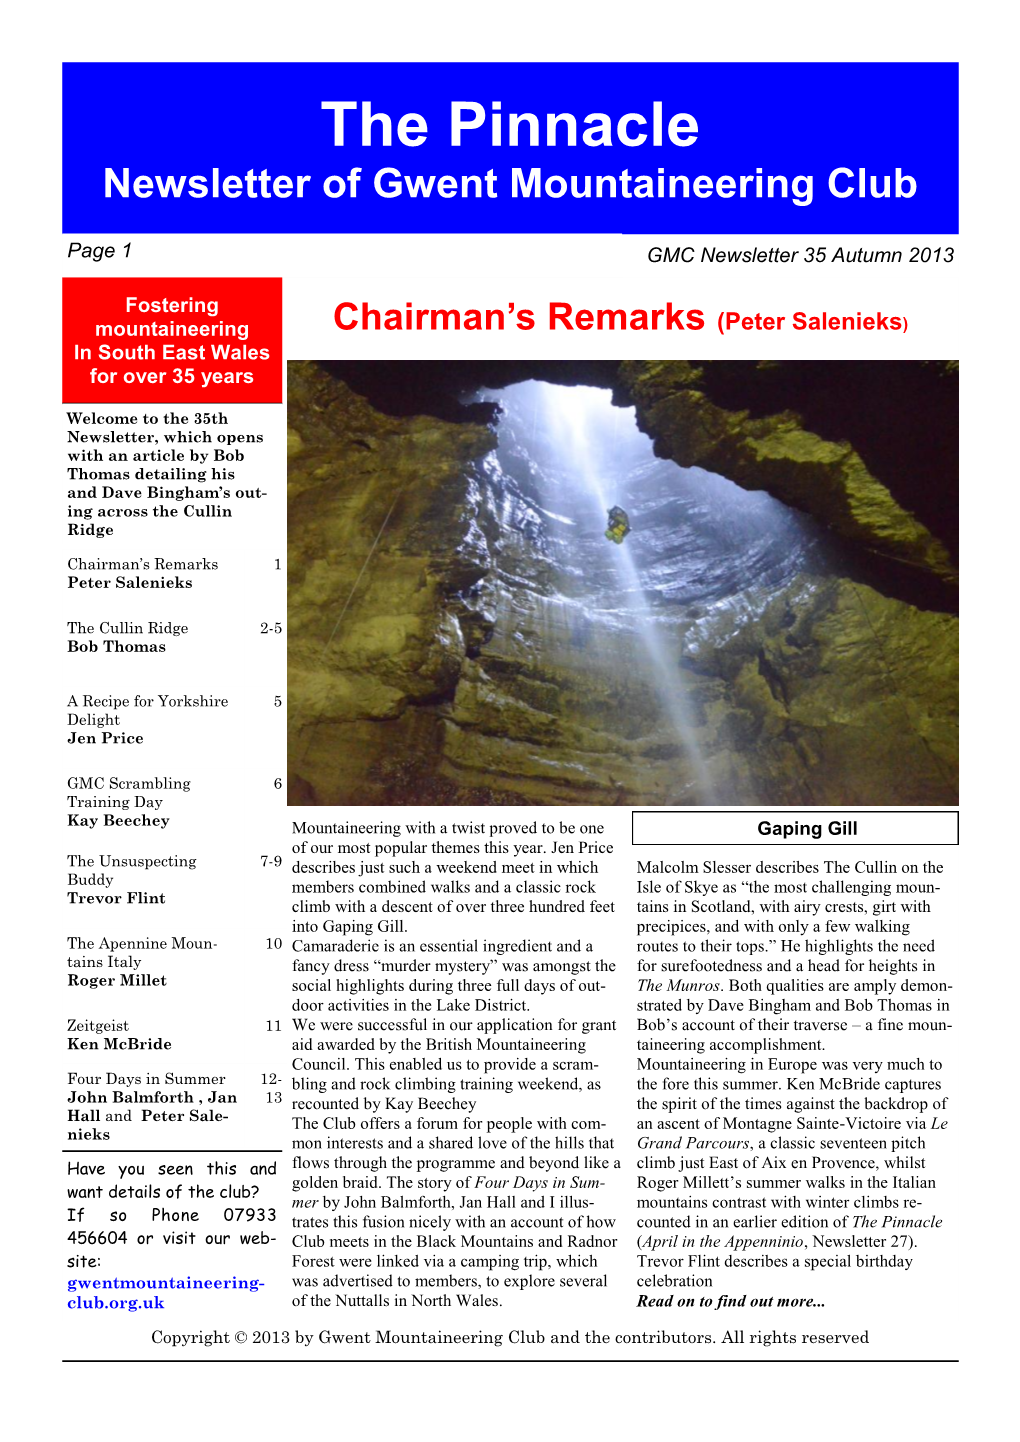 The Pinnacle Newsletter of Gwent Mountaineering Club